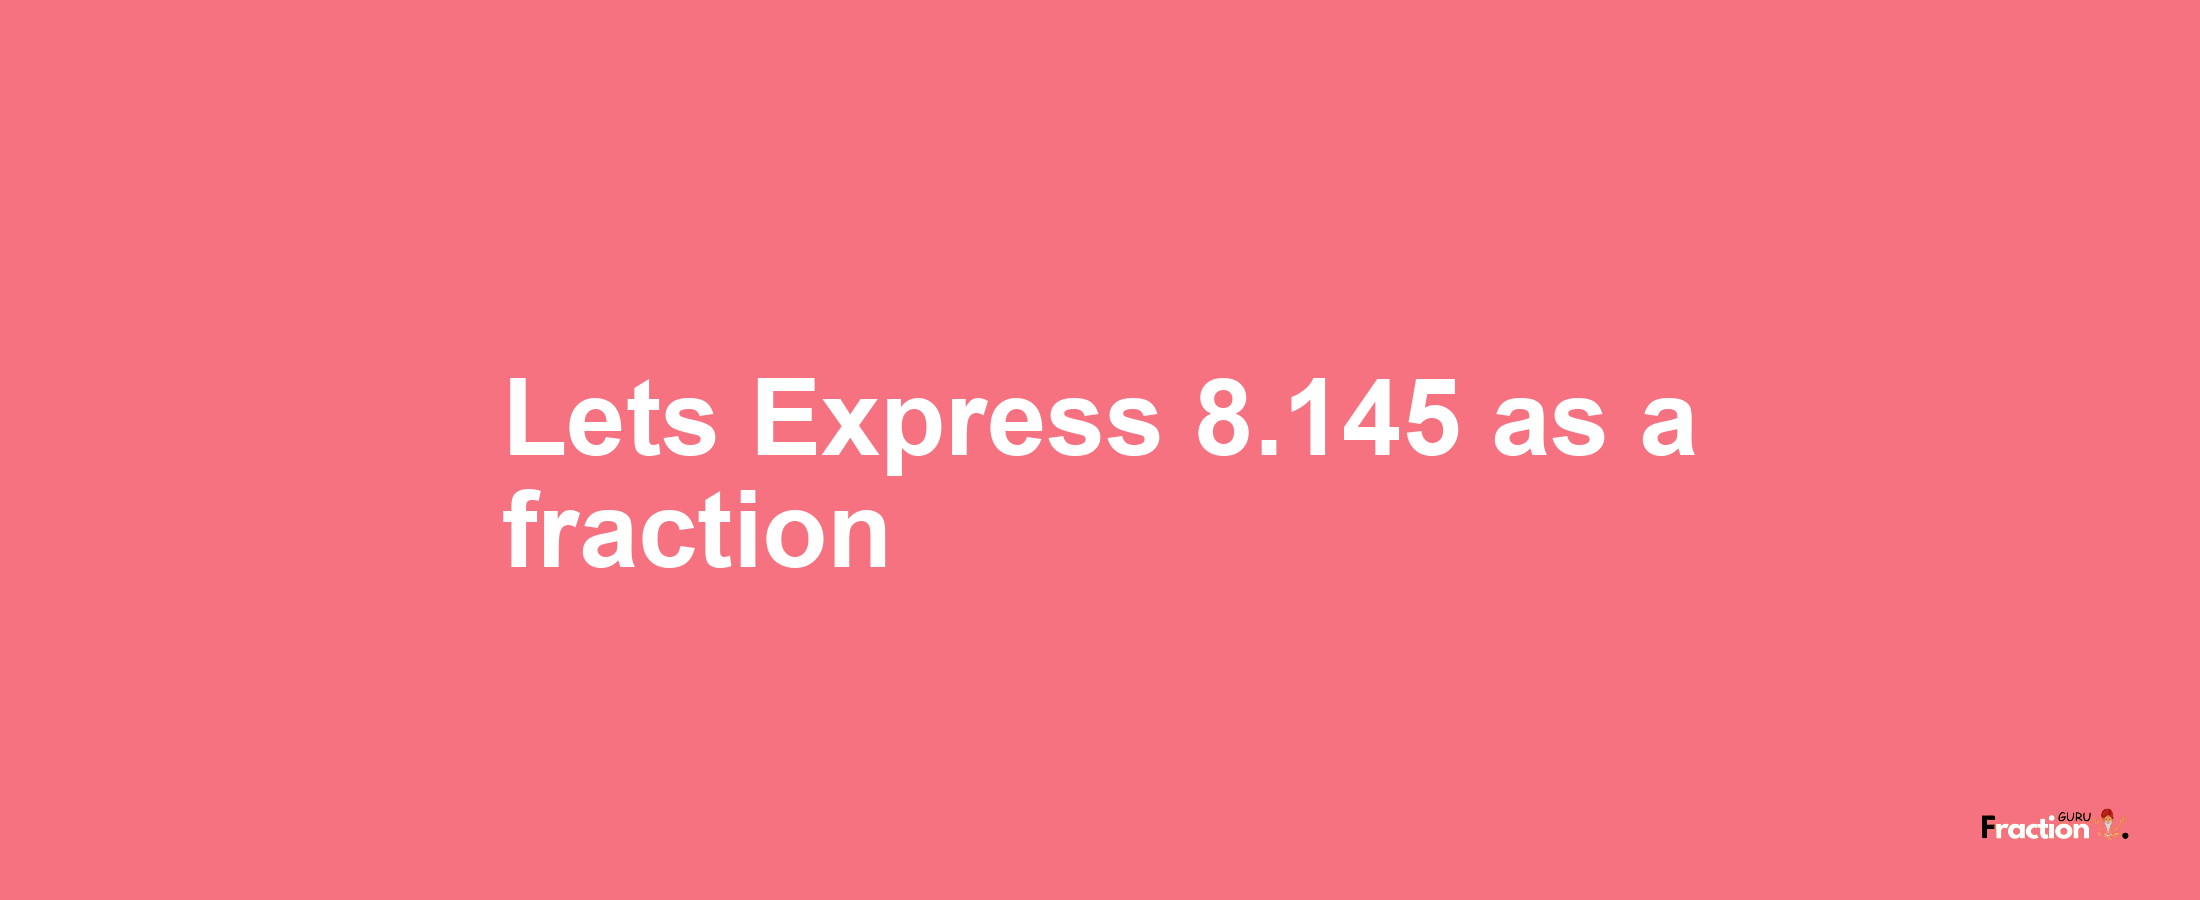 Lets Express 8.145 as afraction